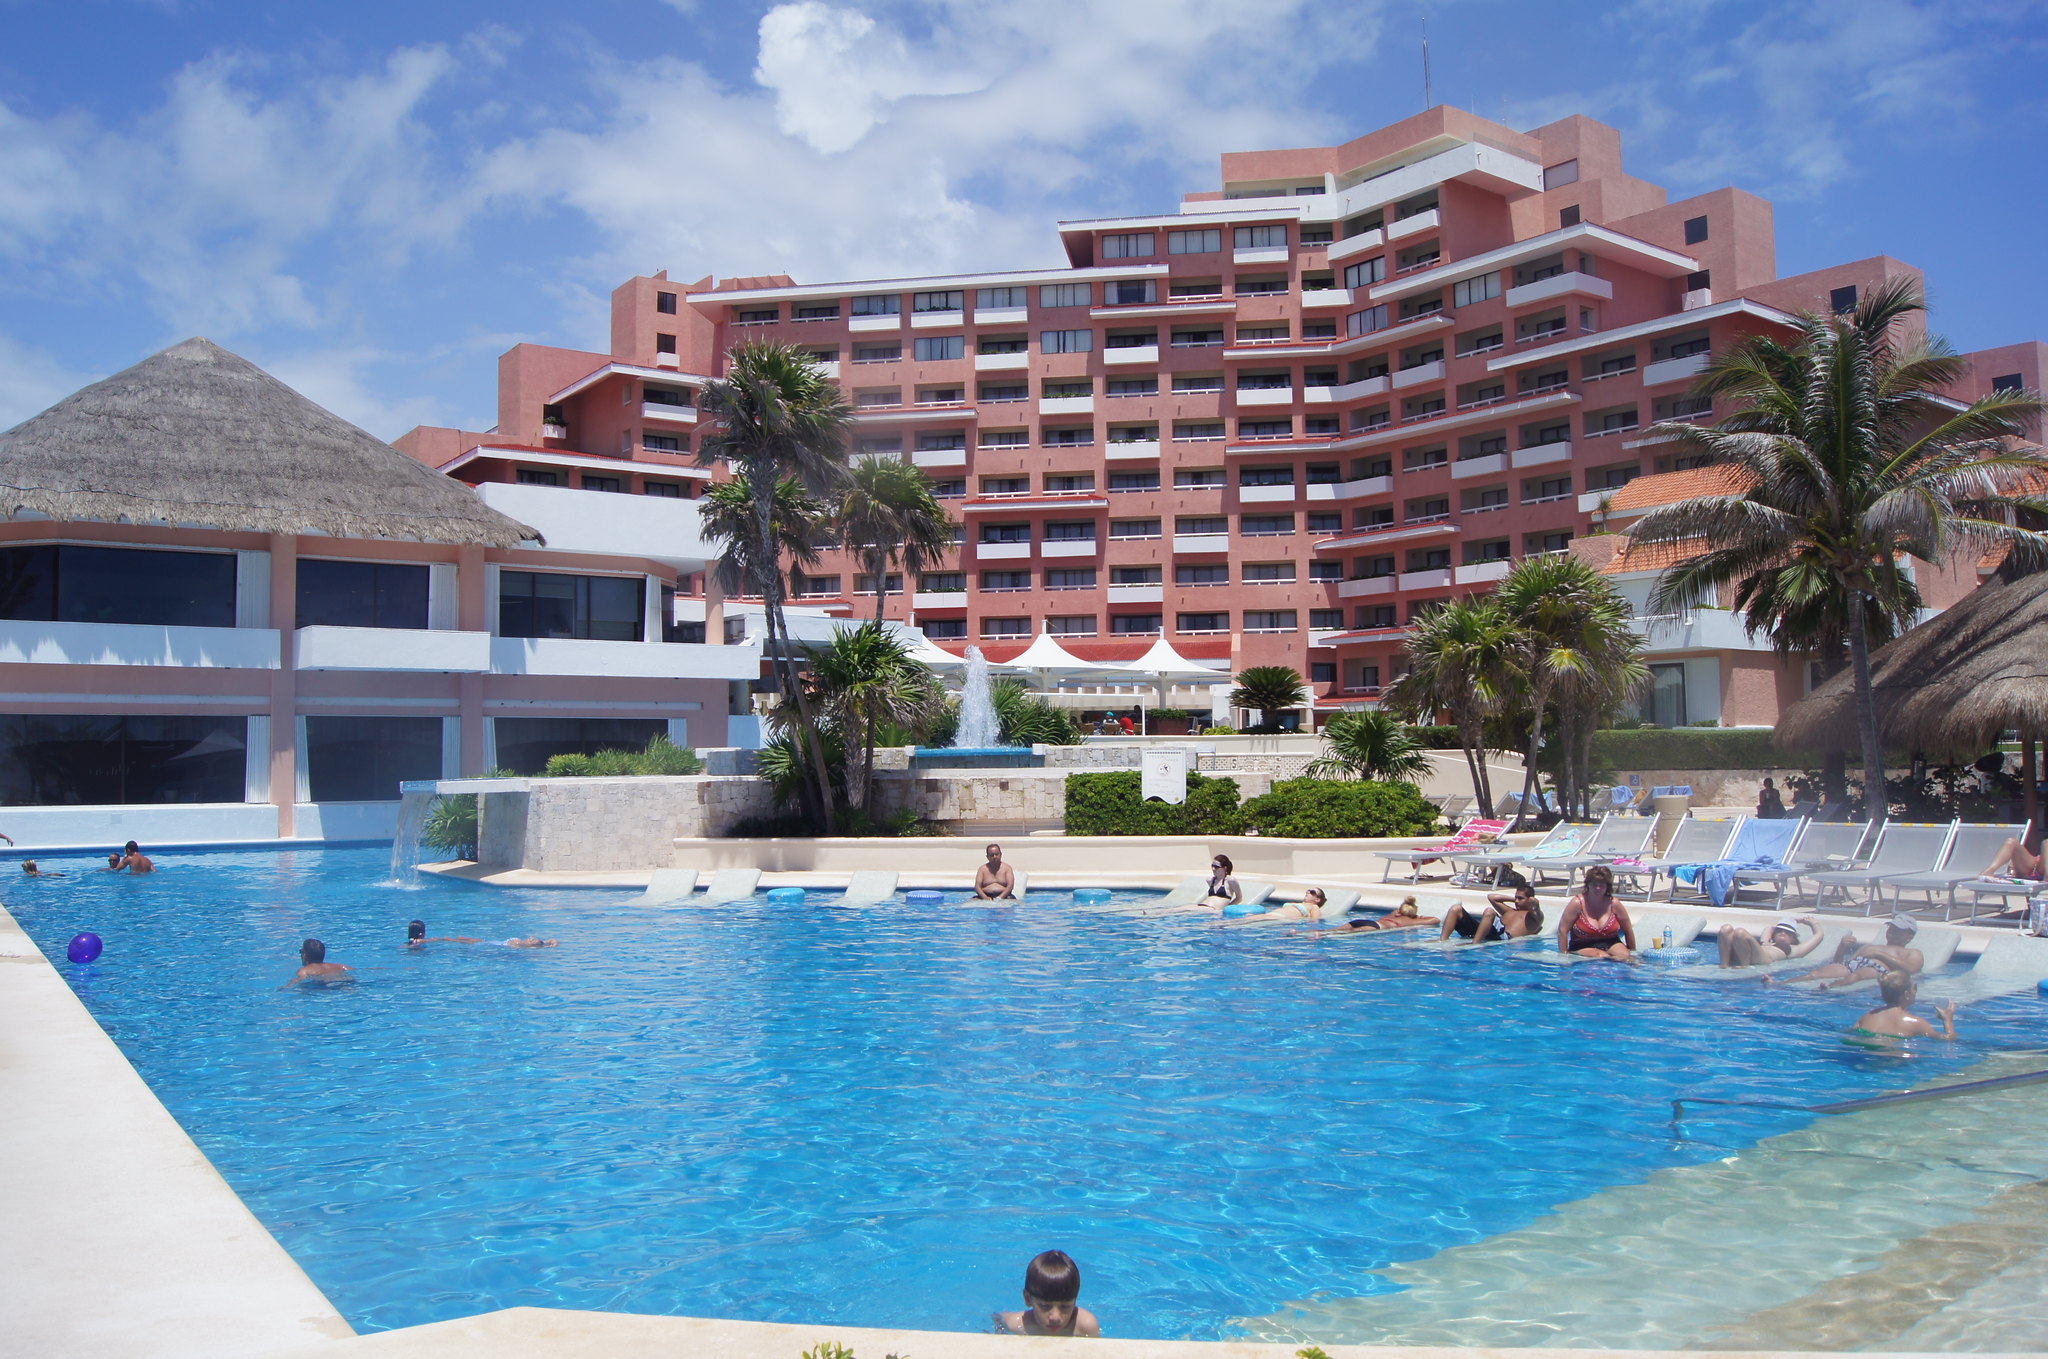 Visitors enjoy swimming and sun bathing on the pool at Omni Cancun Hotel & Villas, titled as one of the best all-inclusive resorts in Mexico, a hot day over its hotel building